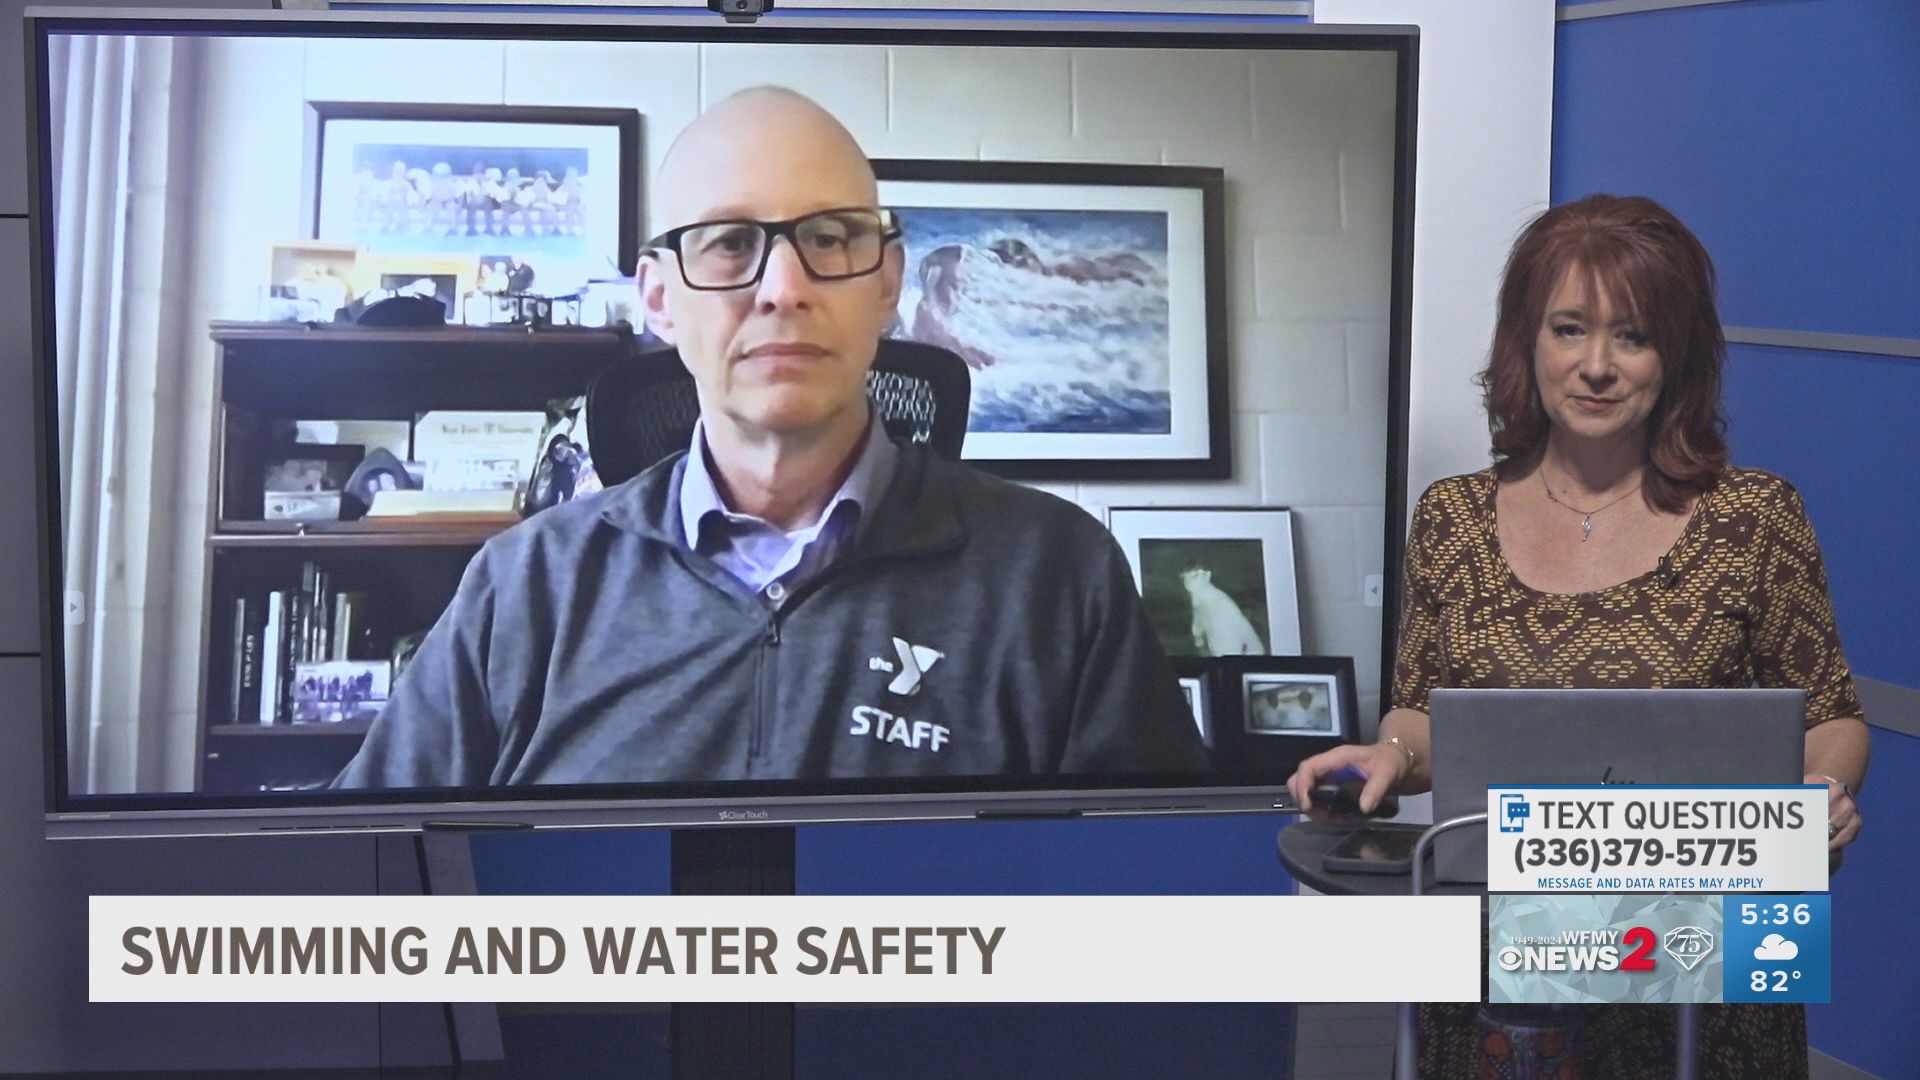 Importance and best practices of water safety in children.